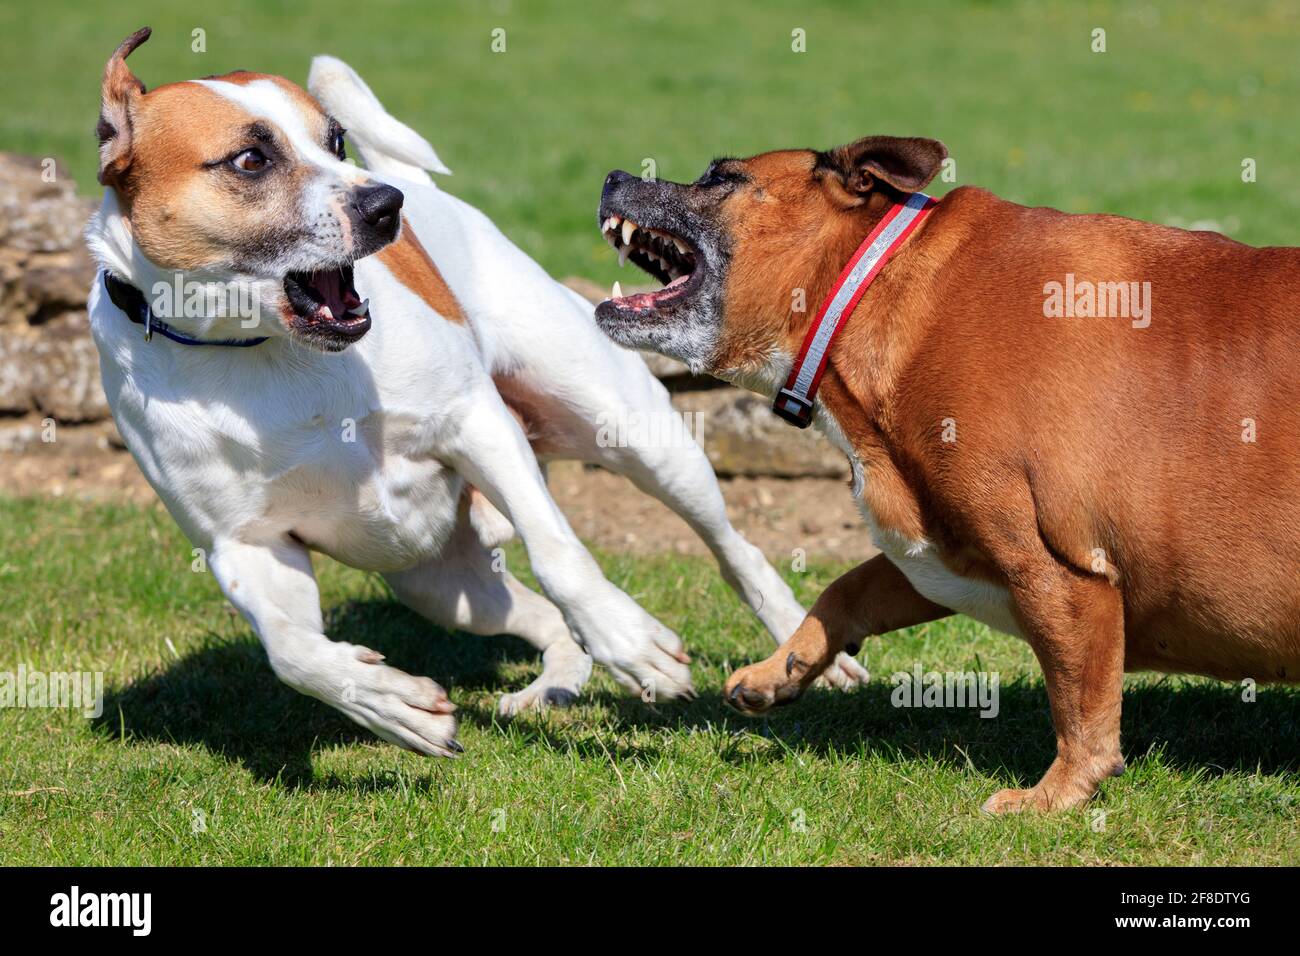 Two dogs play fighting Stock Photo